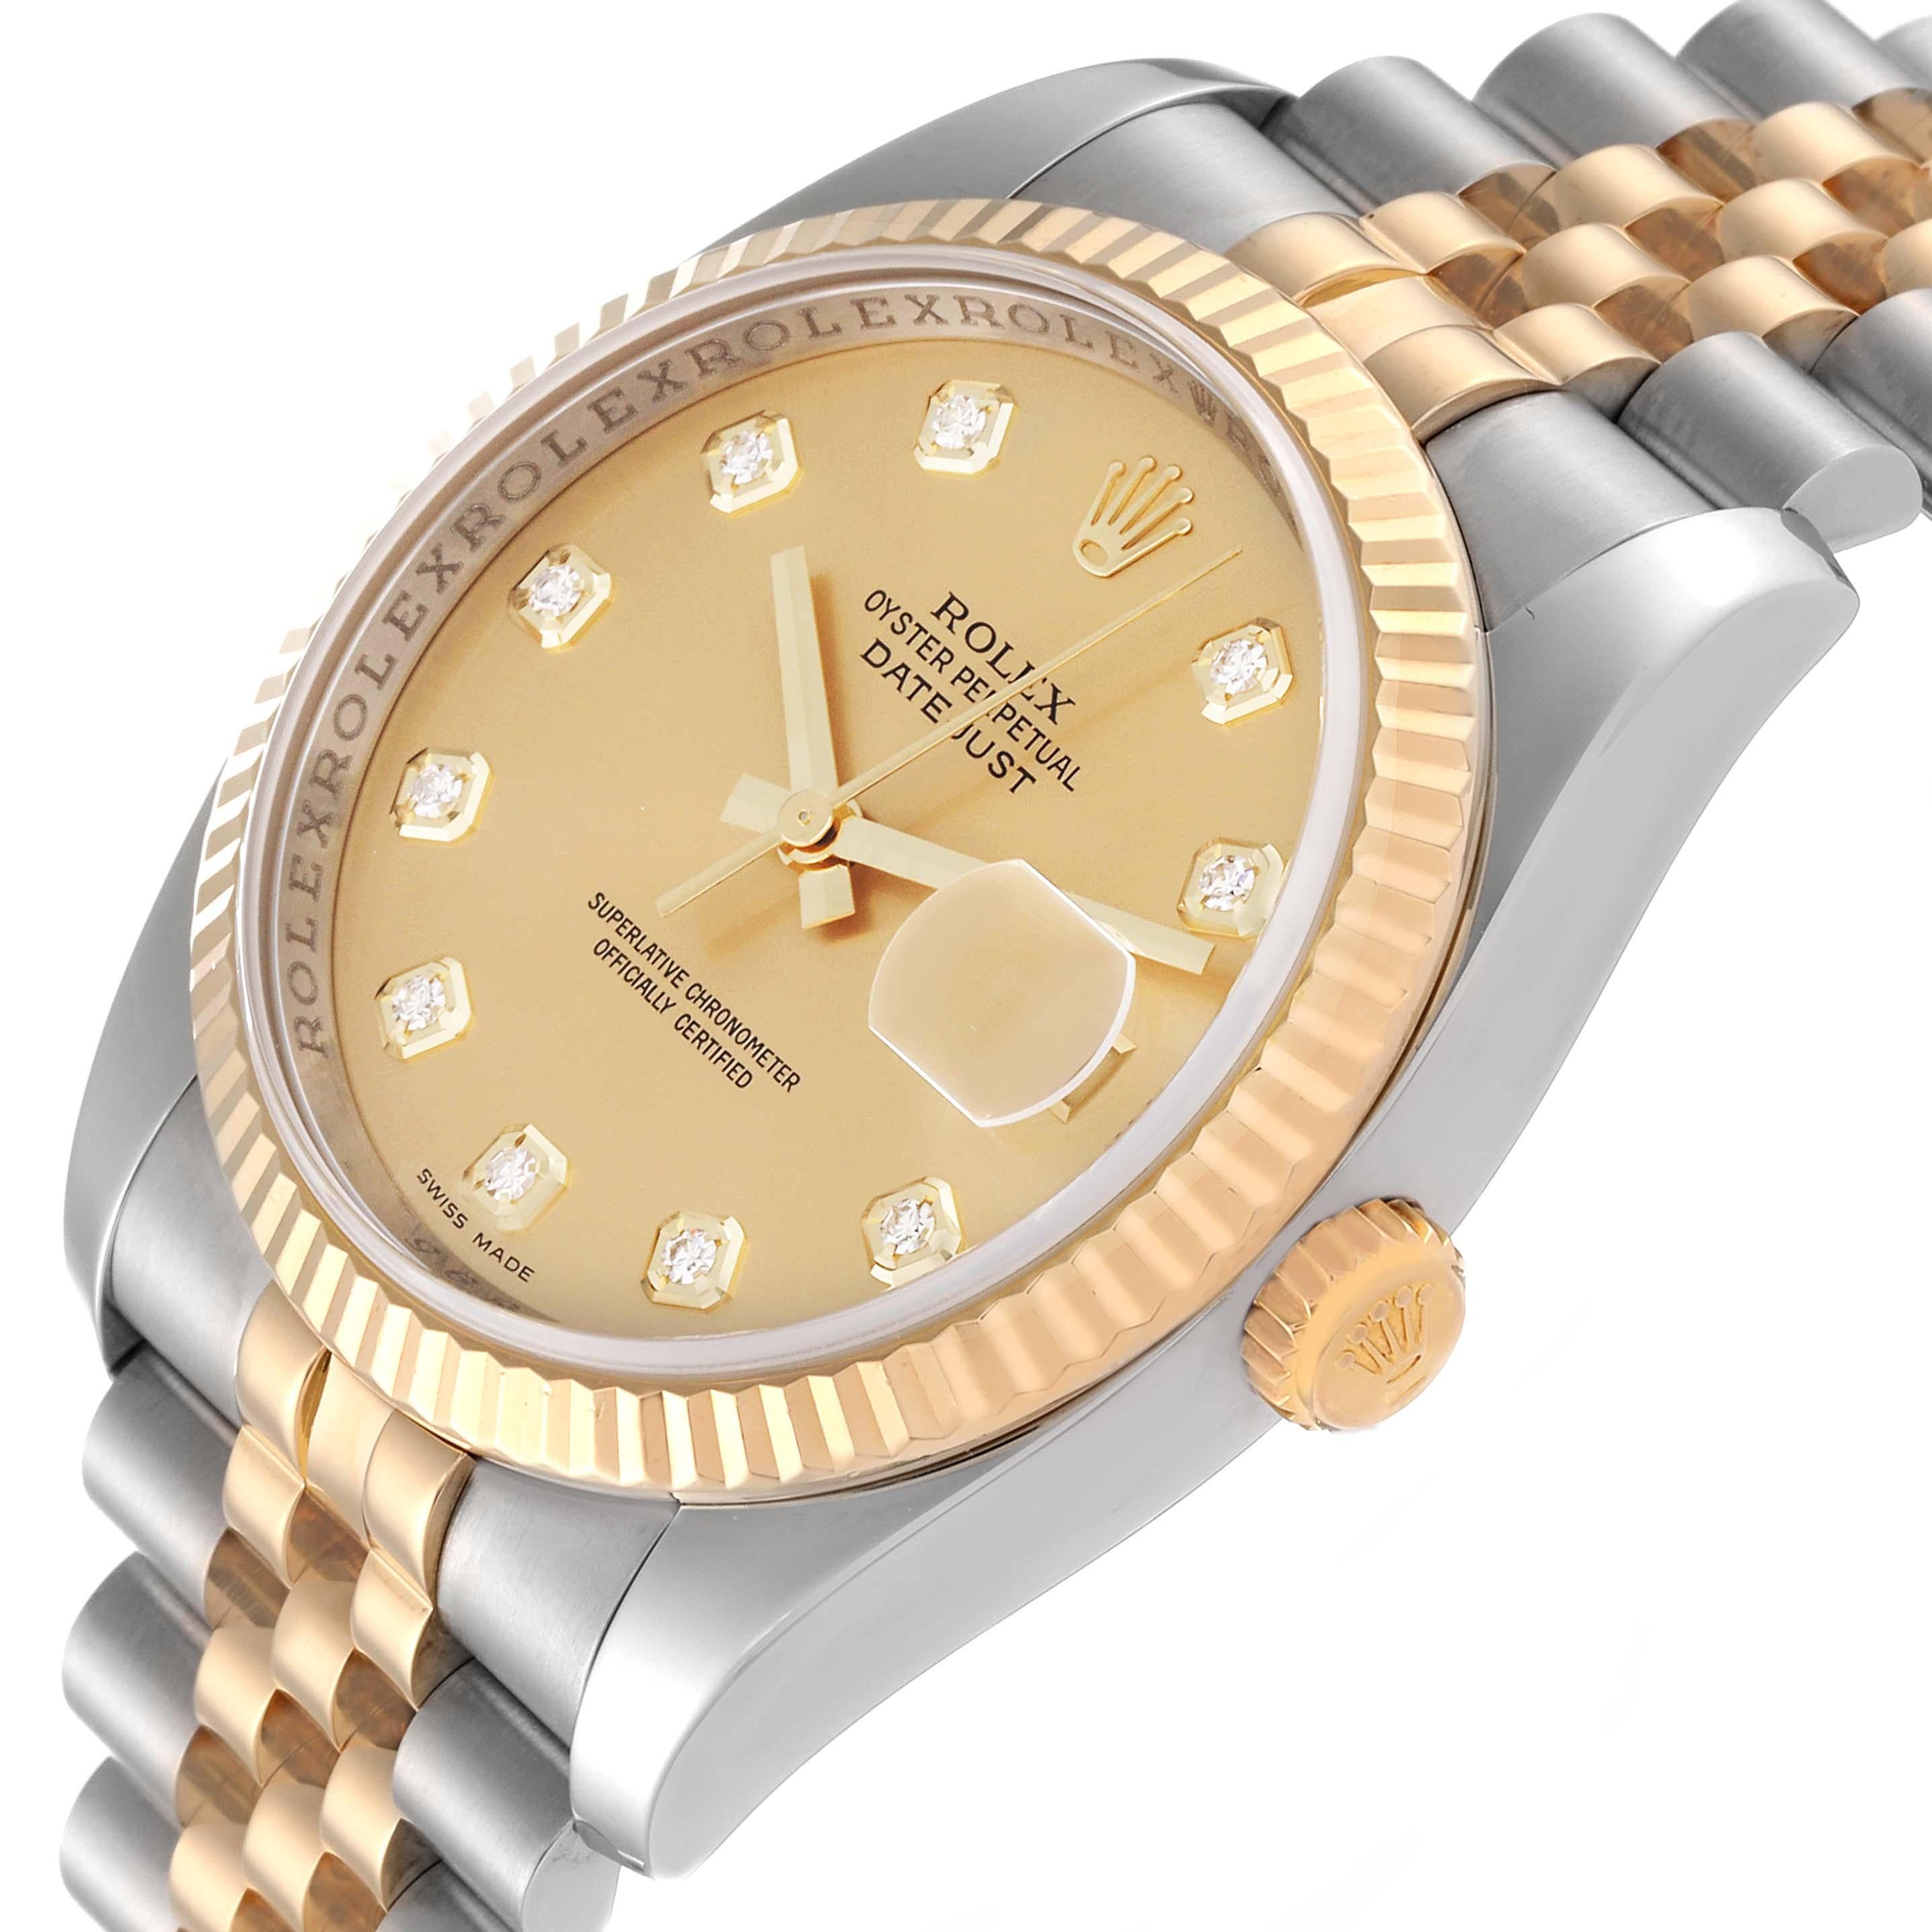 Rolex Datejust Steel Yellow Gold Champagne Diamond Dial Mens Watch 116233 For Sale 1